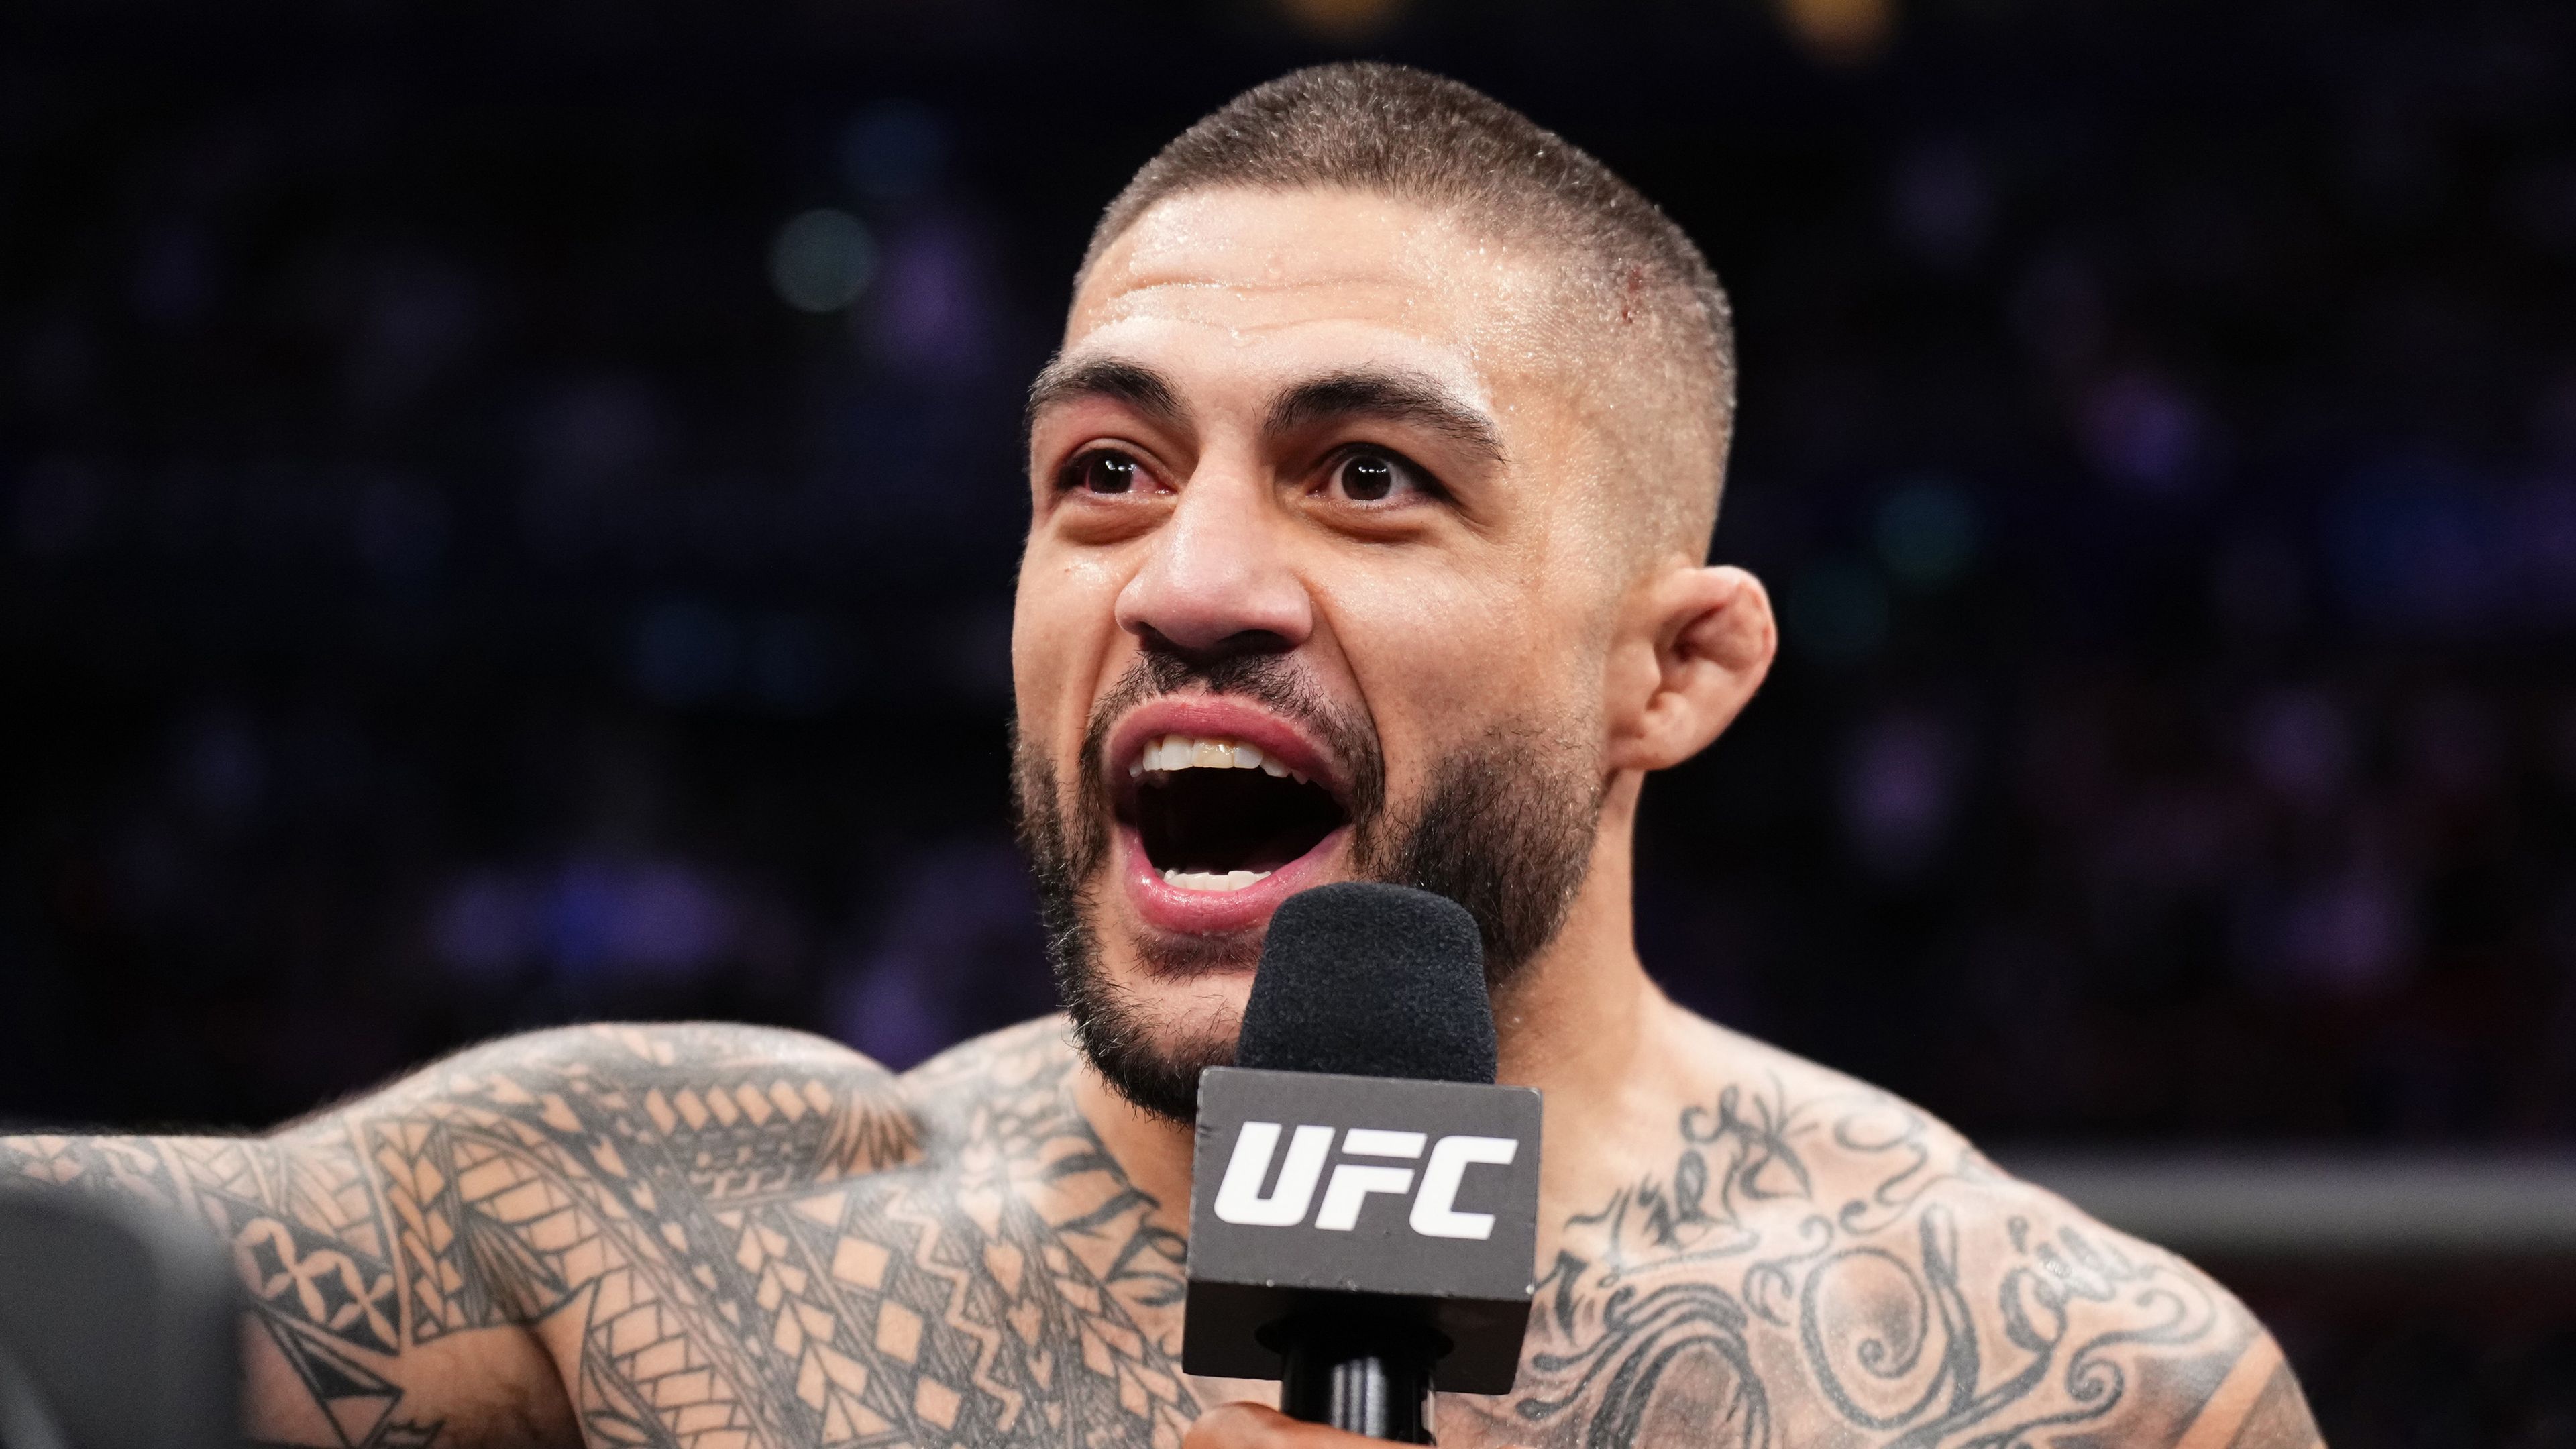 EXCLUSIVE: Tyson Pedro's fierce warning to undefeated UFC rival ahead of Vegas showdown